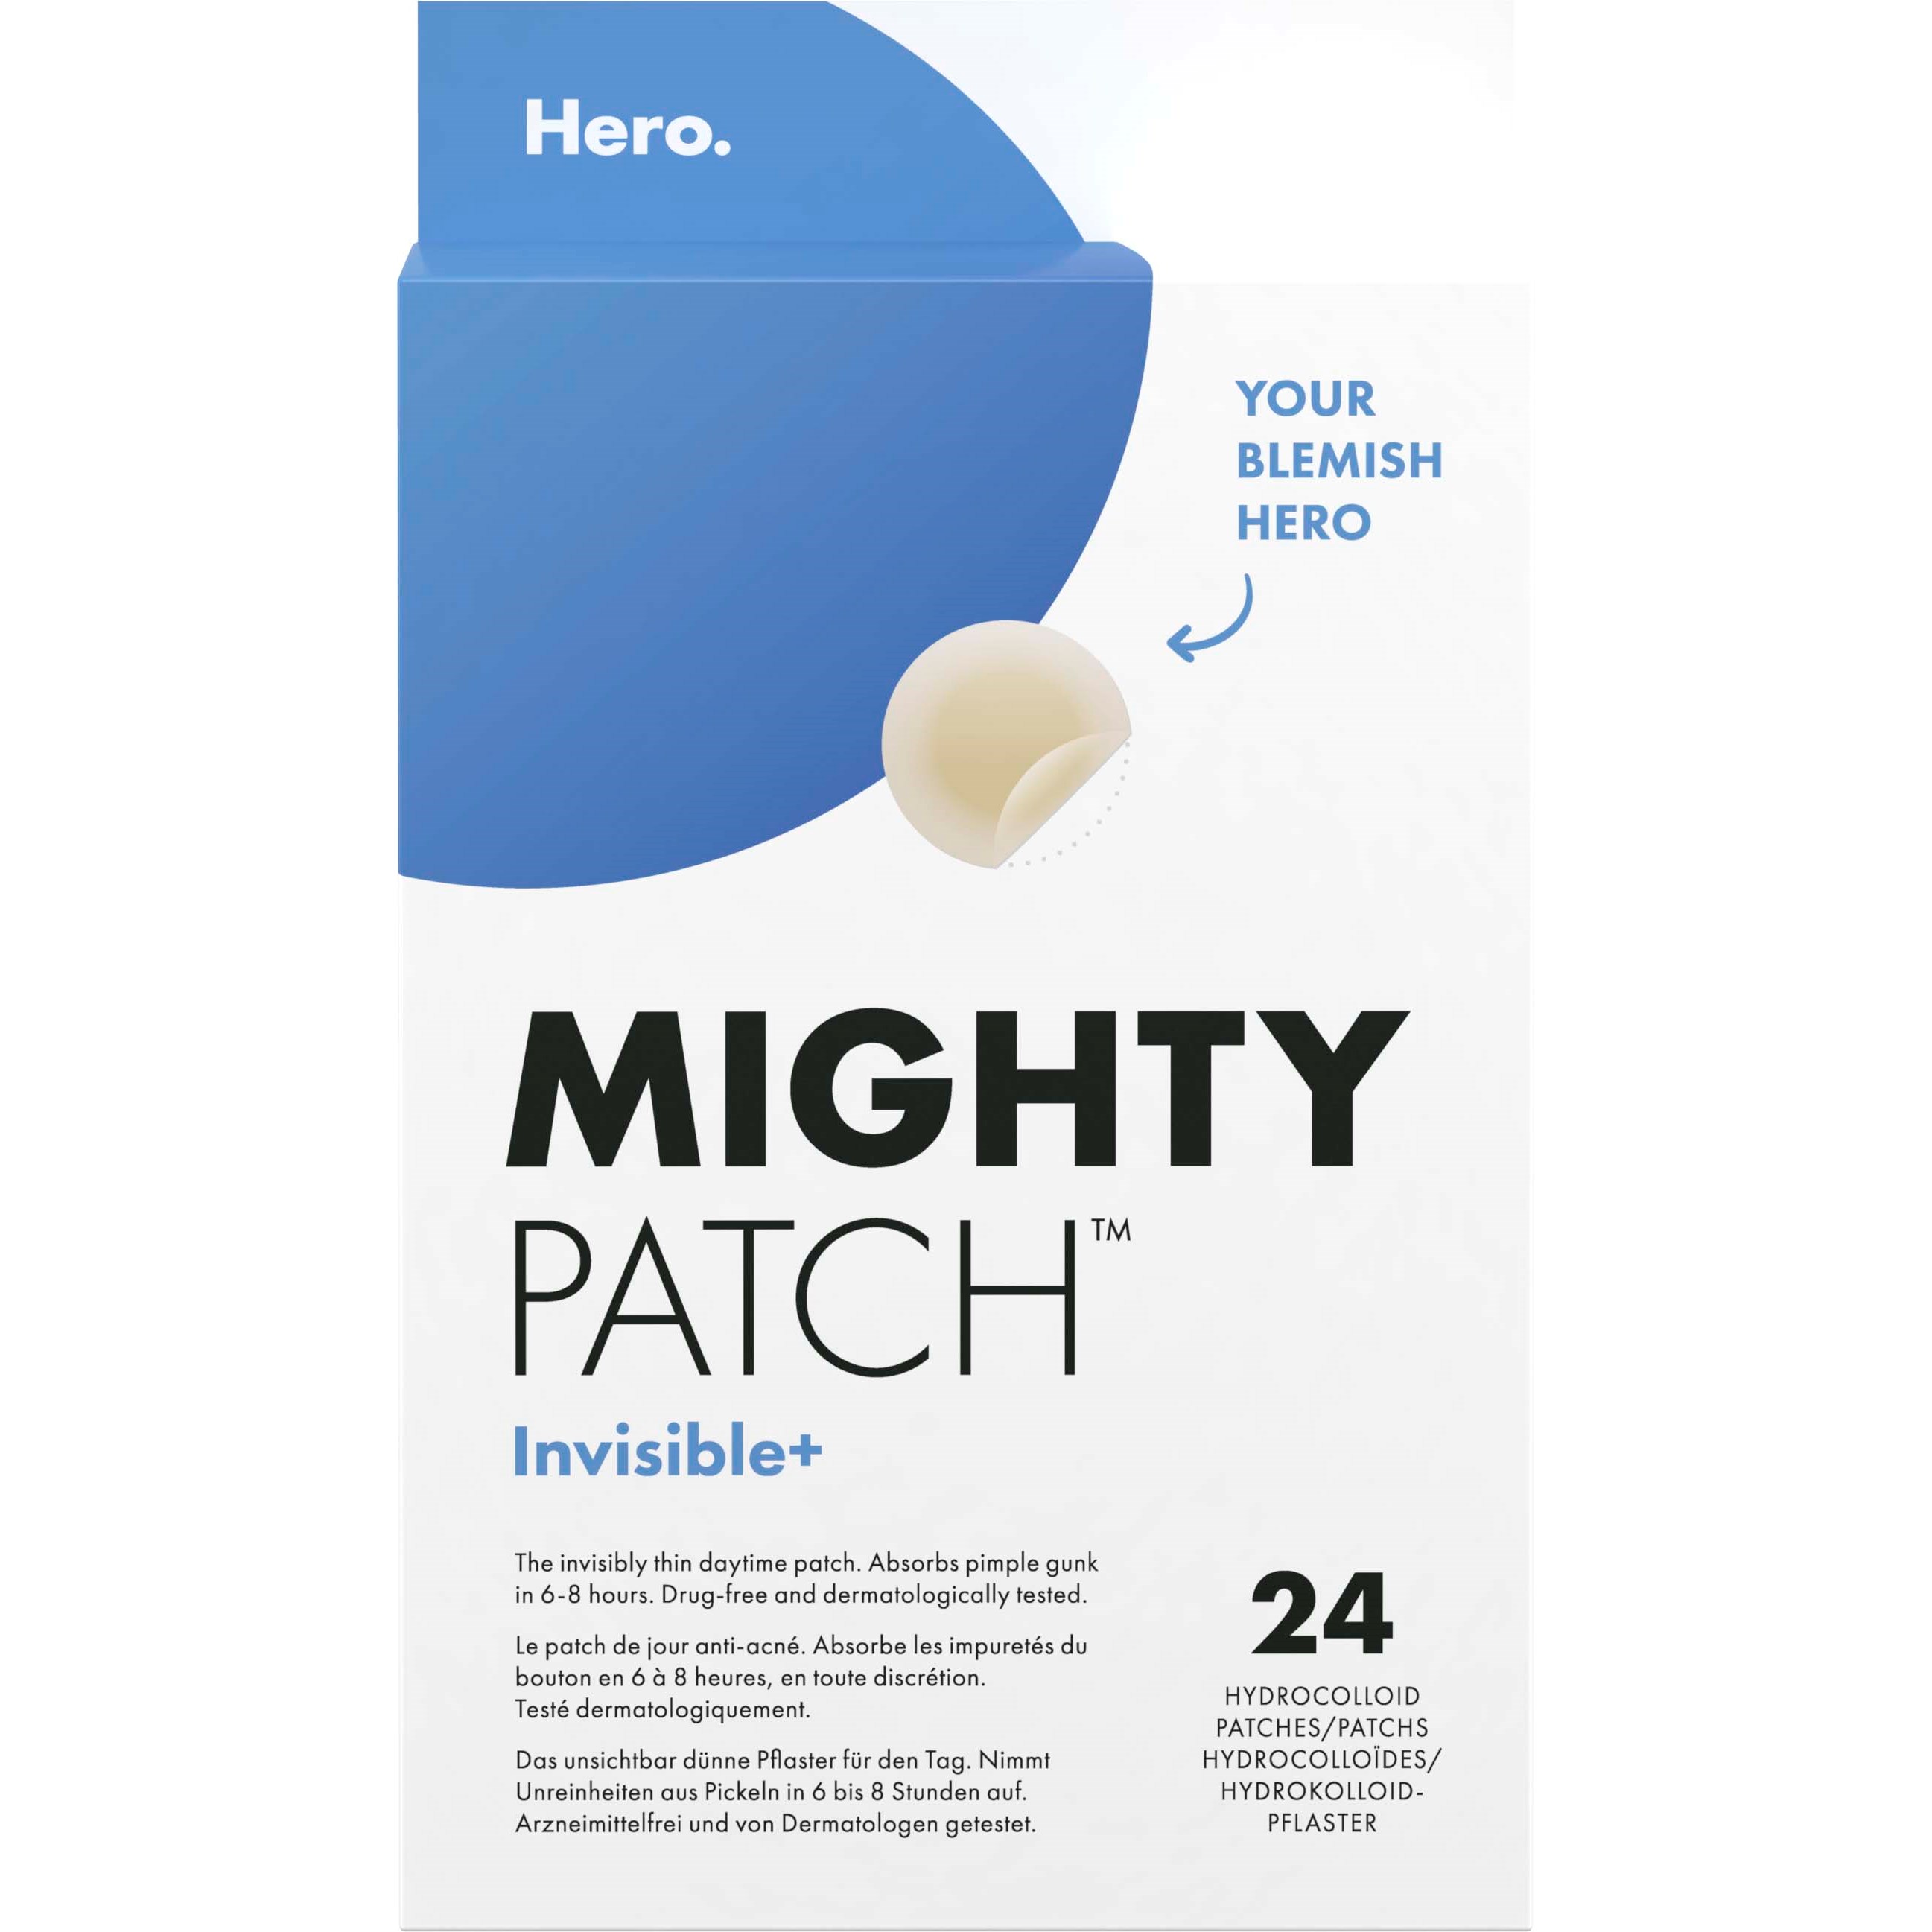 Läs mer om Hero Mighty Patch Invisible+